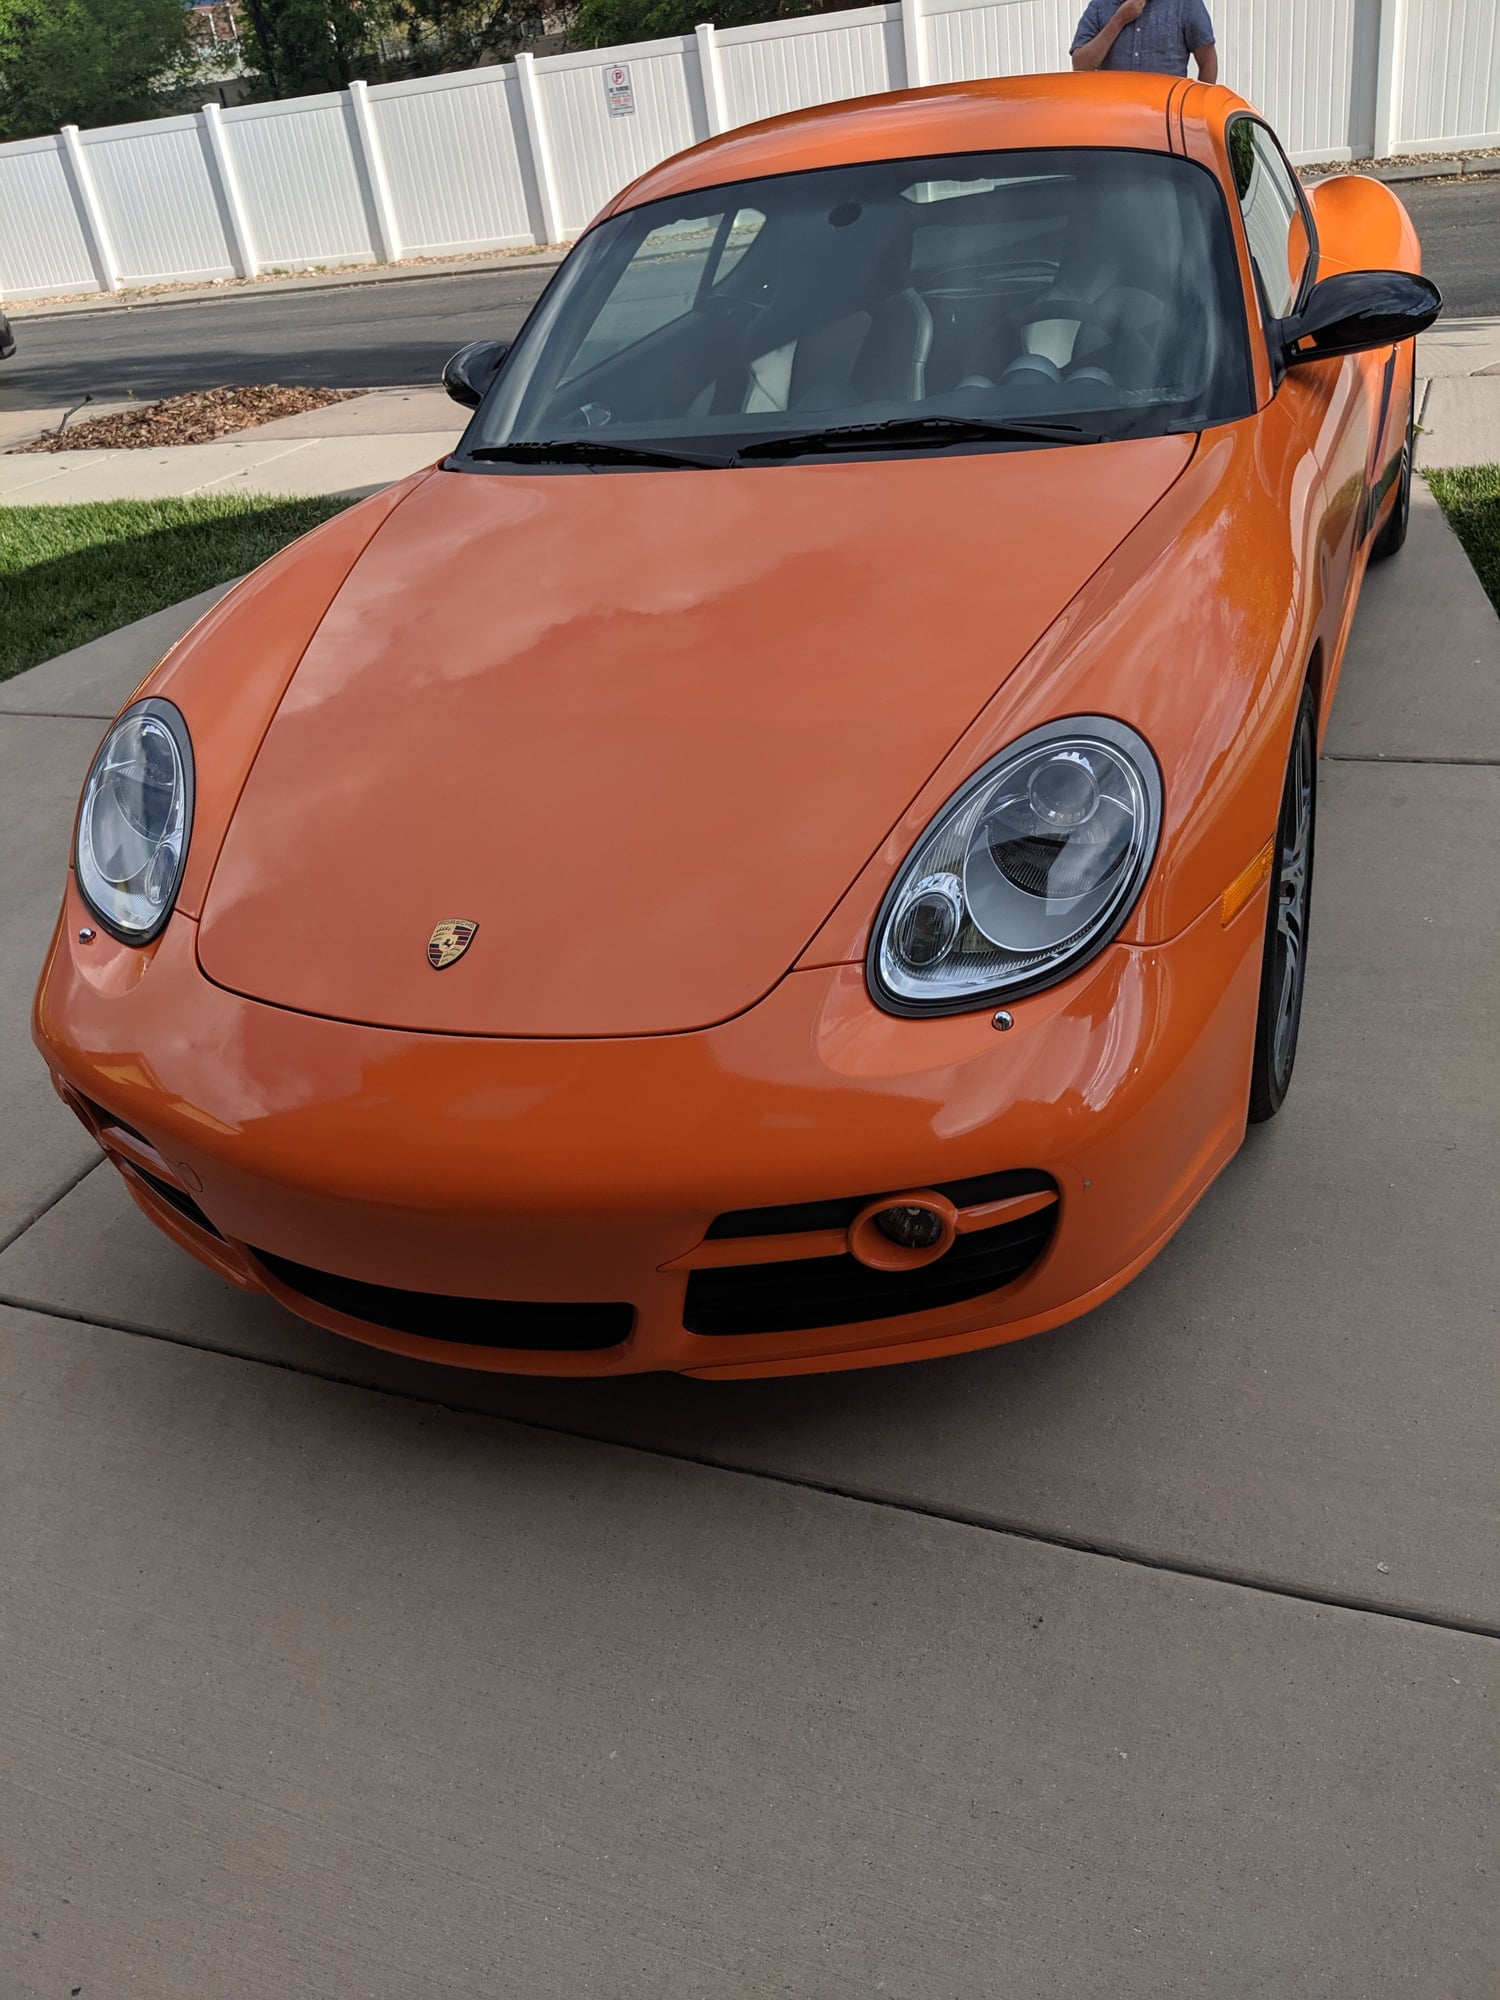 2008 Porsche Cayman - Very low mileage Cayman S Sport - Used - VIN WP0AB29888U783253 - 9,030 Miles - 6 cyl - 2WD - Manual - Coupe - Orange - Midvale, UT 84047, United States